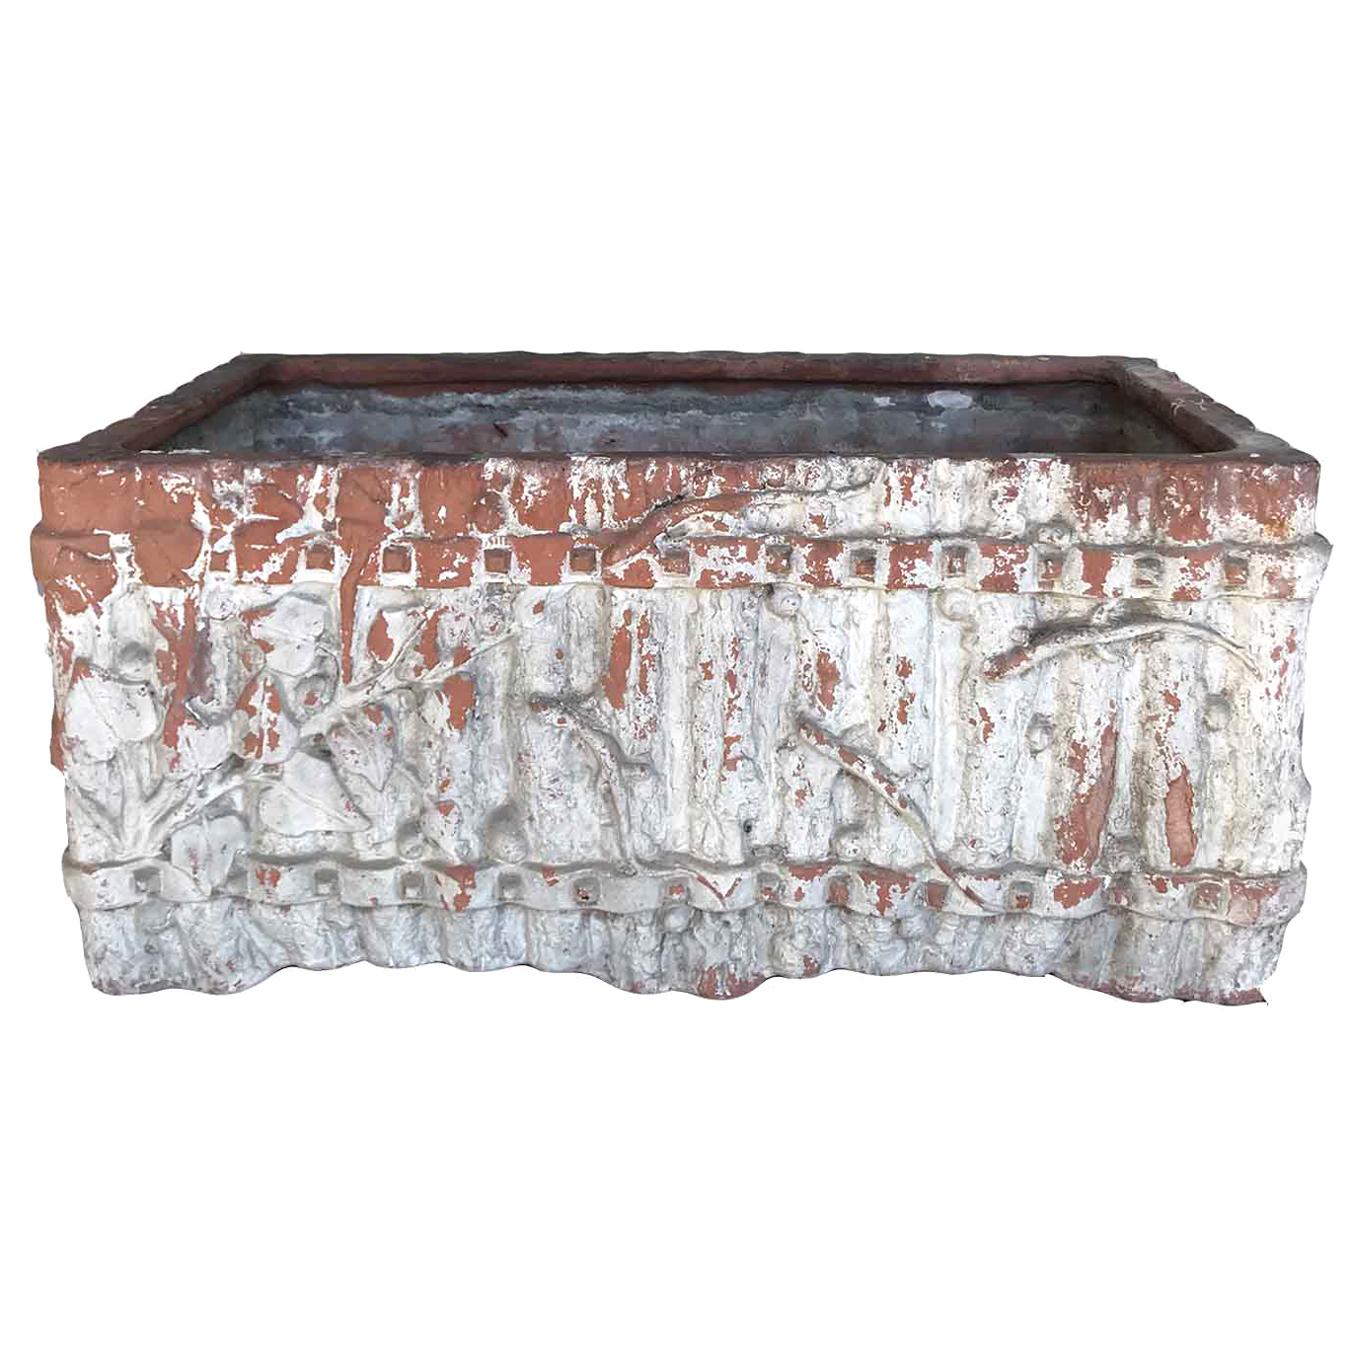 Terracotta Planter with Branch Design with Whitewashed Patina For Sale